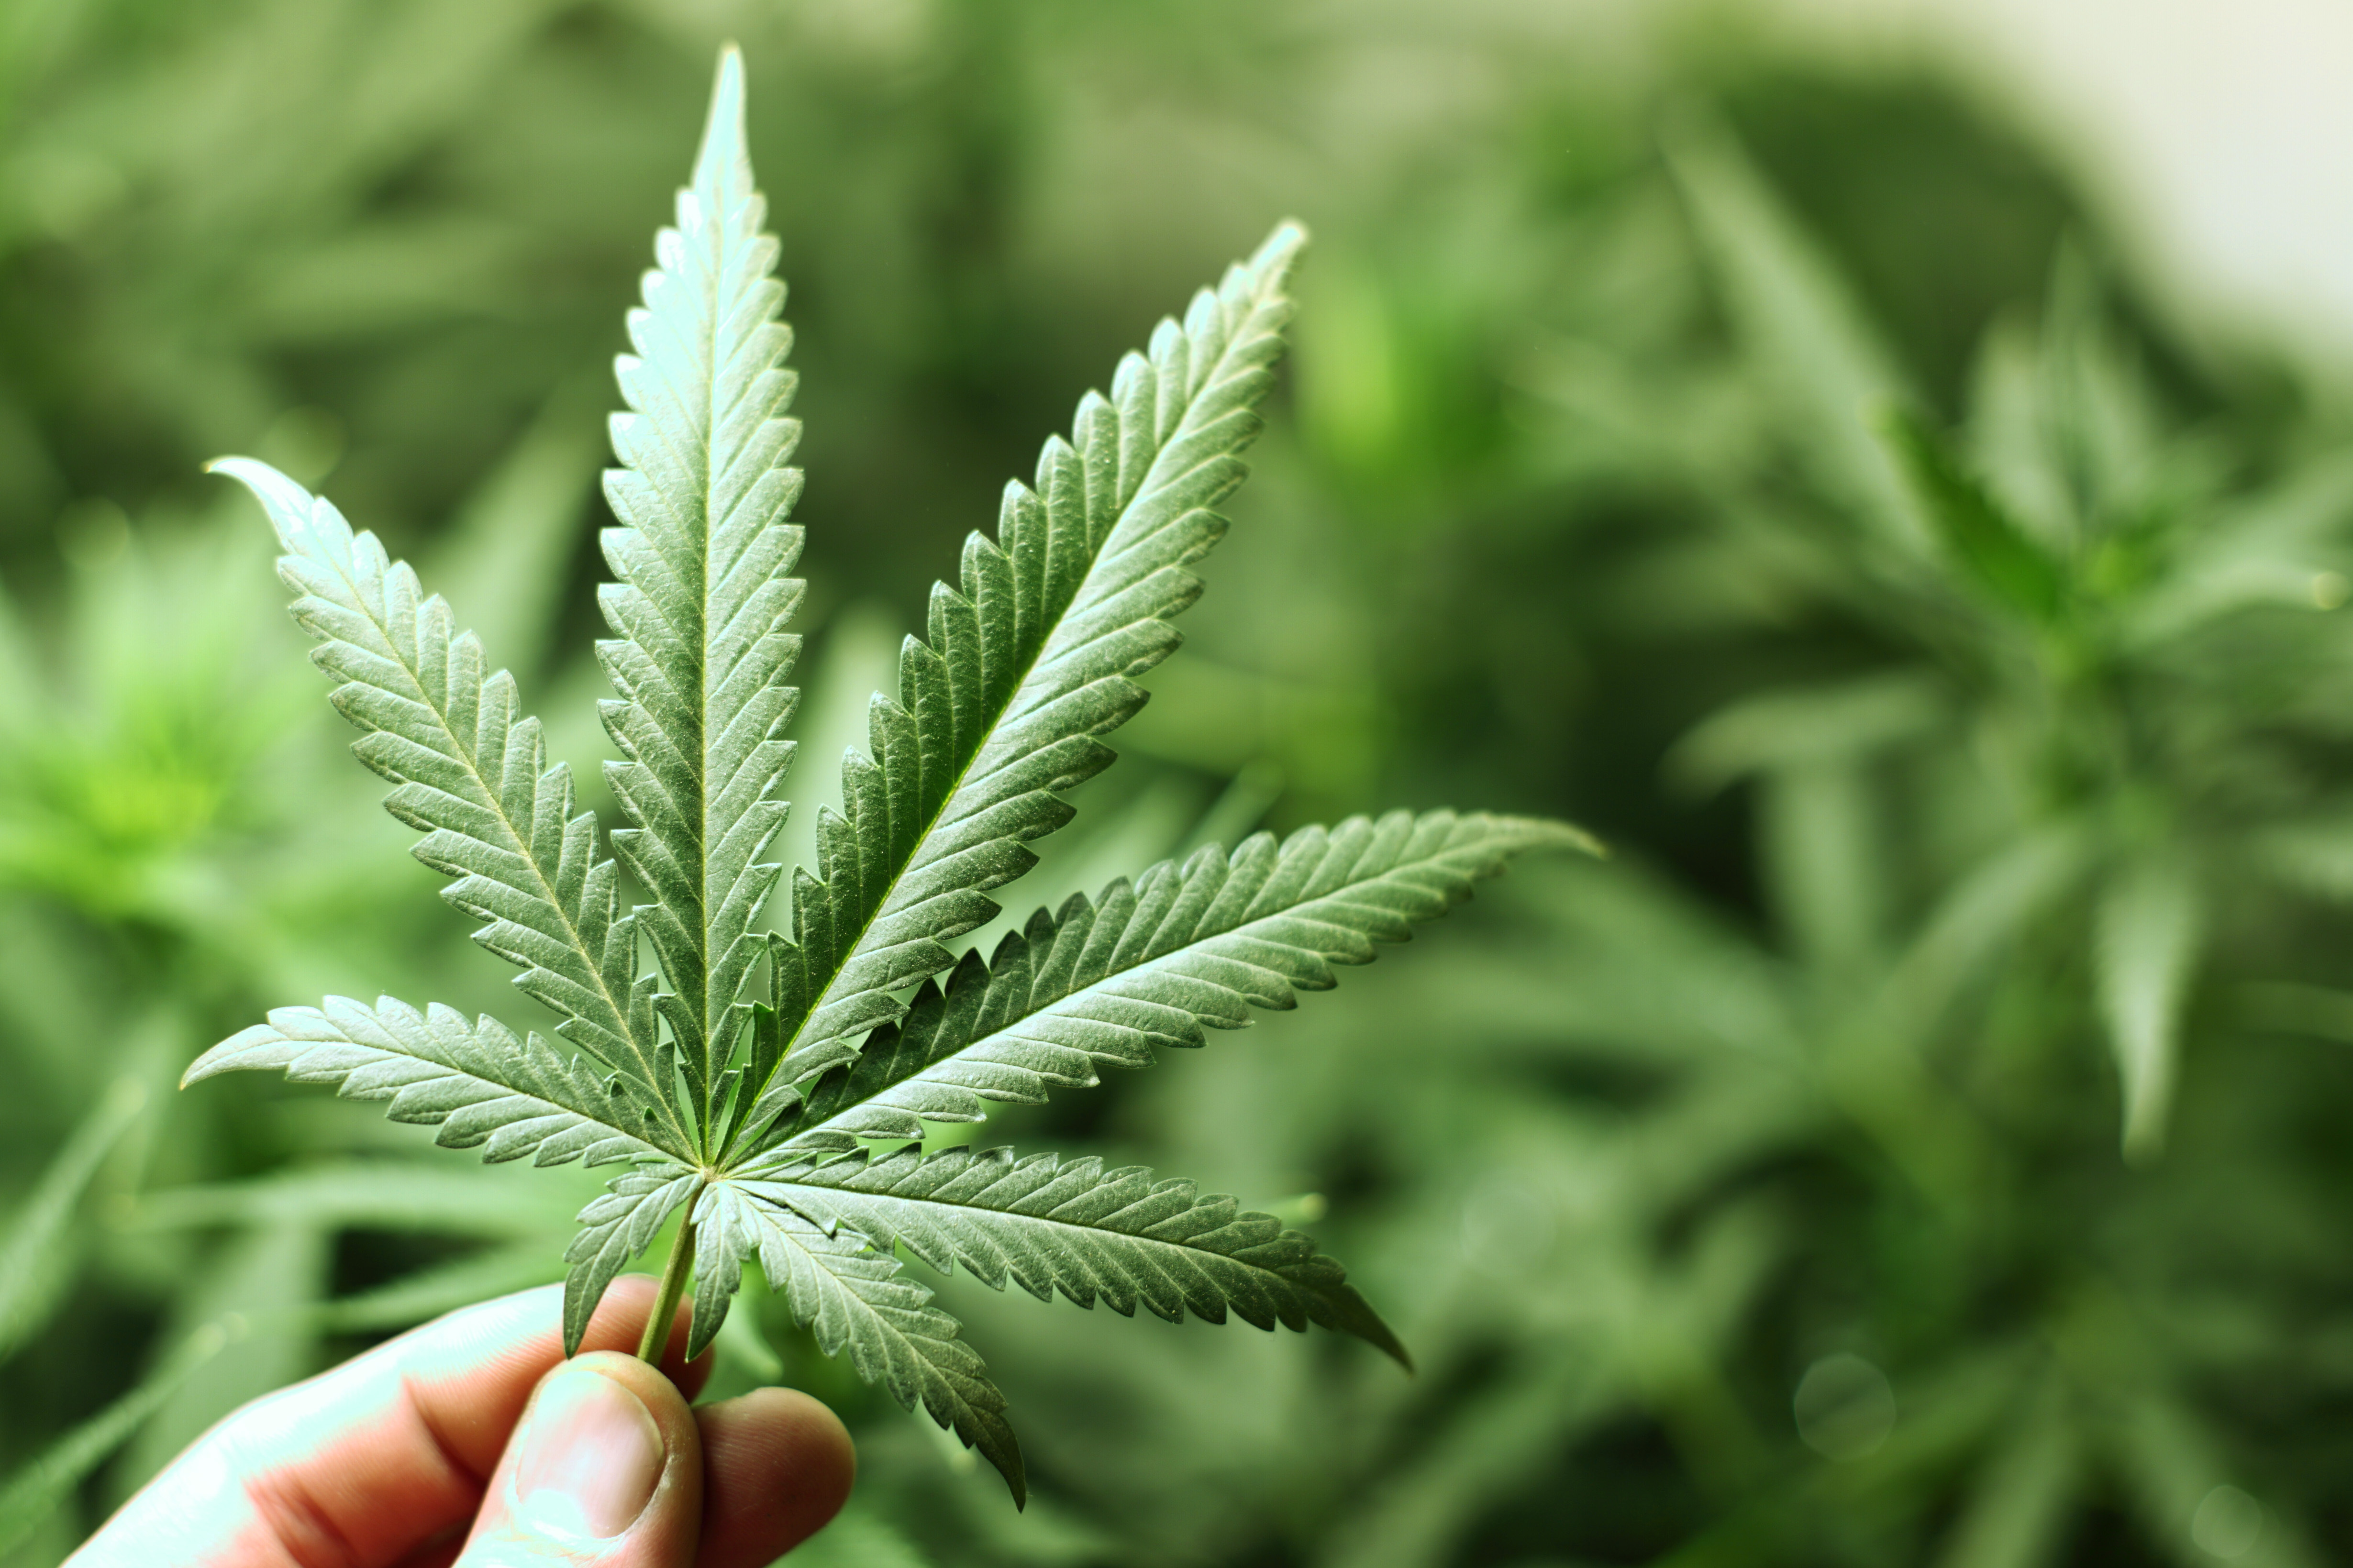 Jamaicans can now have up to five marijuana plants on their premises.